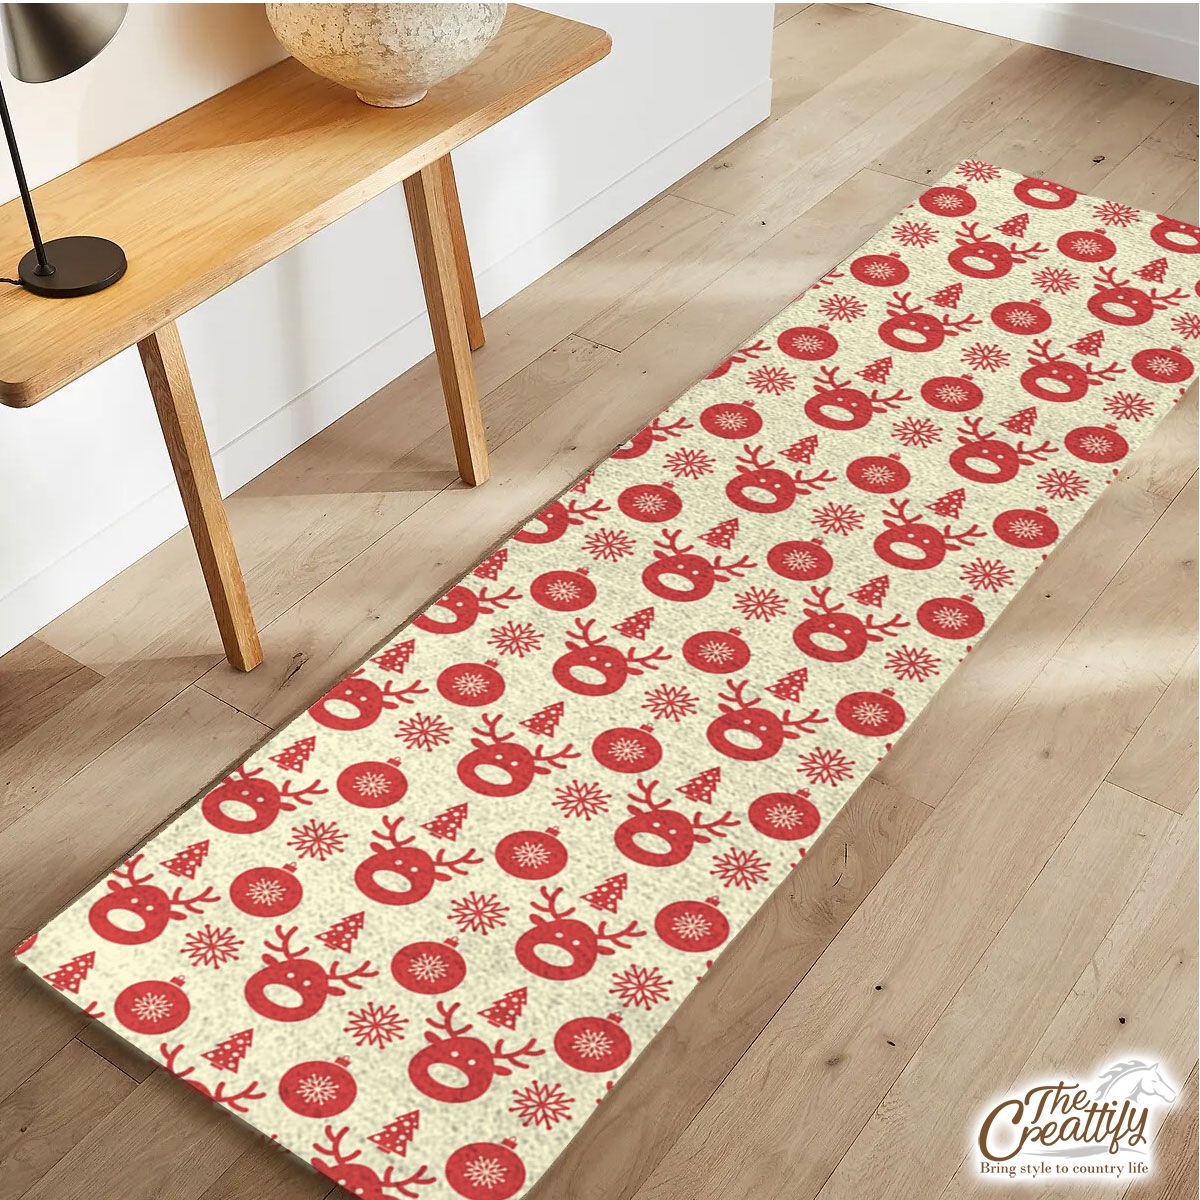 Red And Light Yellow Reindeer, Christmas Ball, Snowflakes Runner Carpet